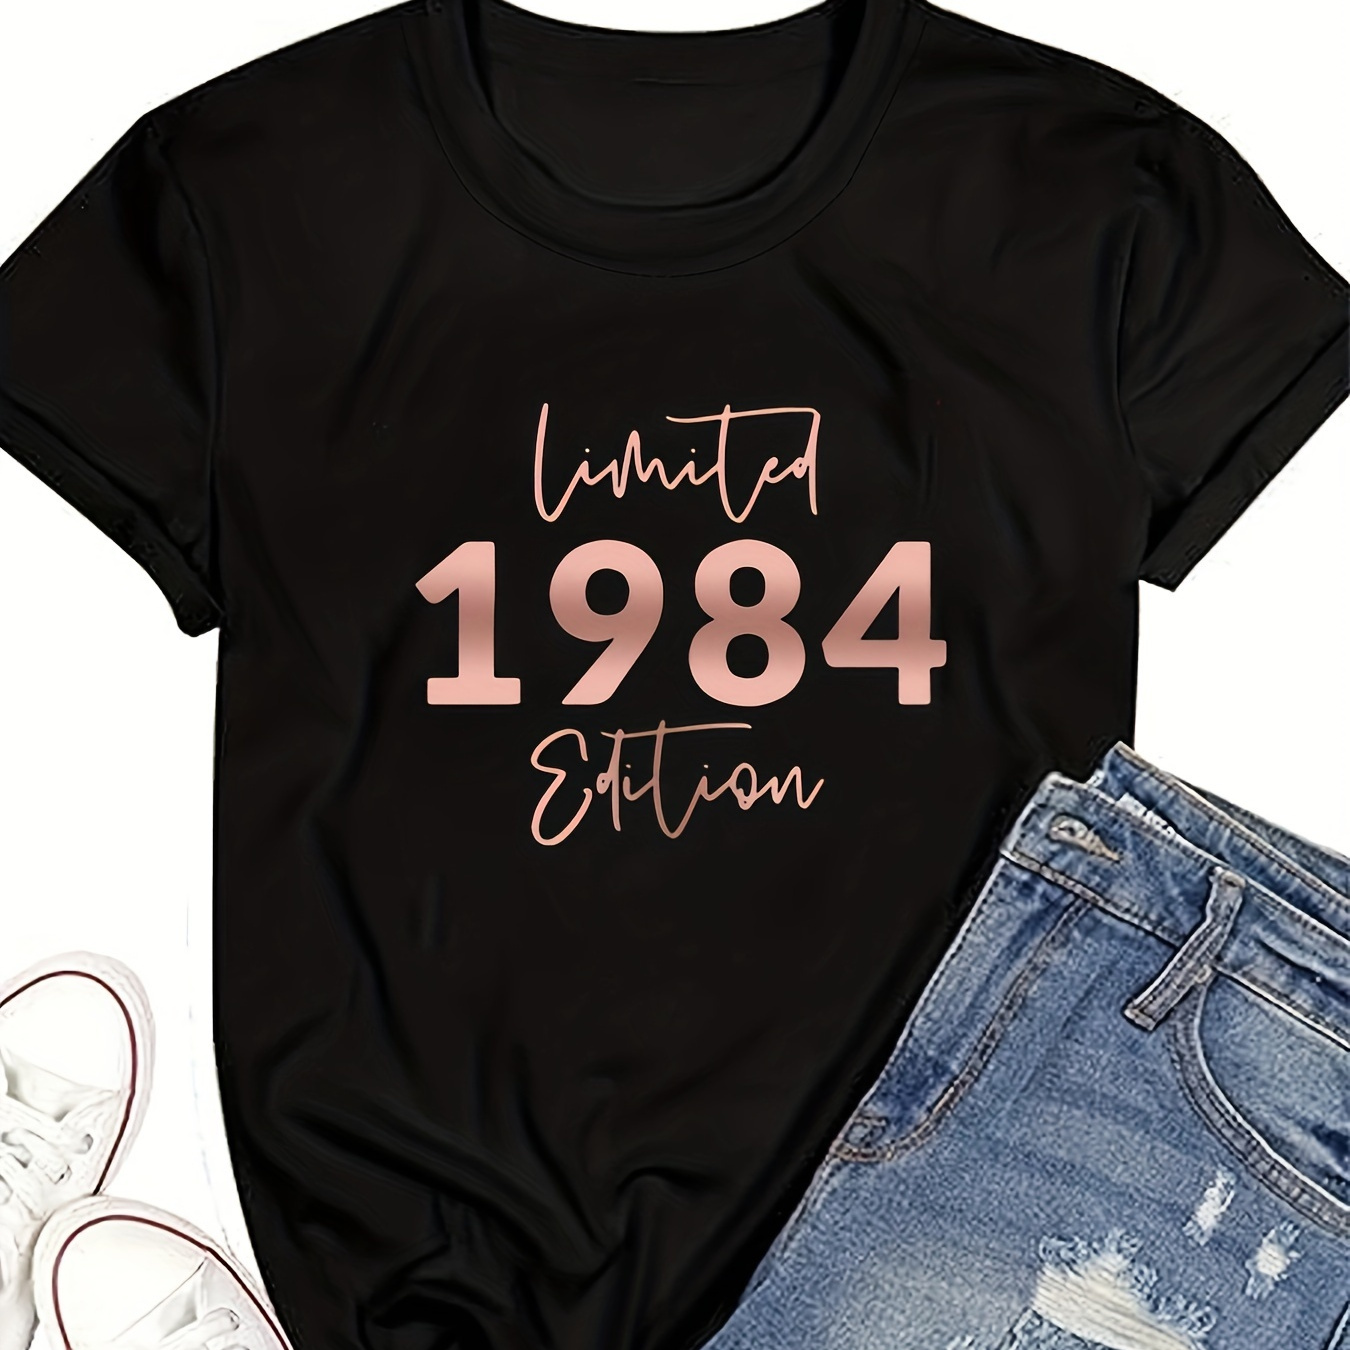 

1984 Print Crew Neck T-shirt, Short Sleeve Casual Top For Summer & Spring, Women's Clothing